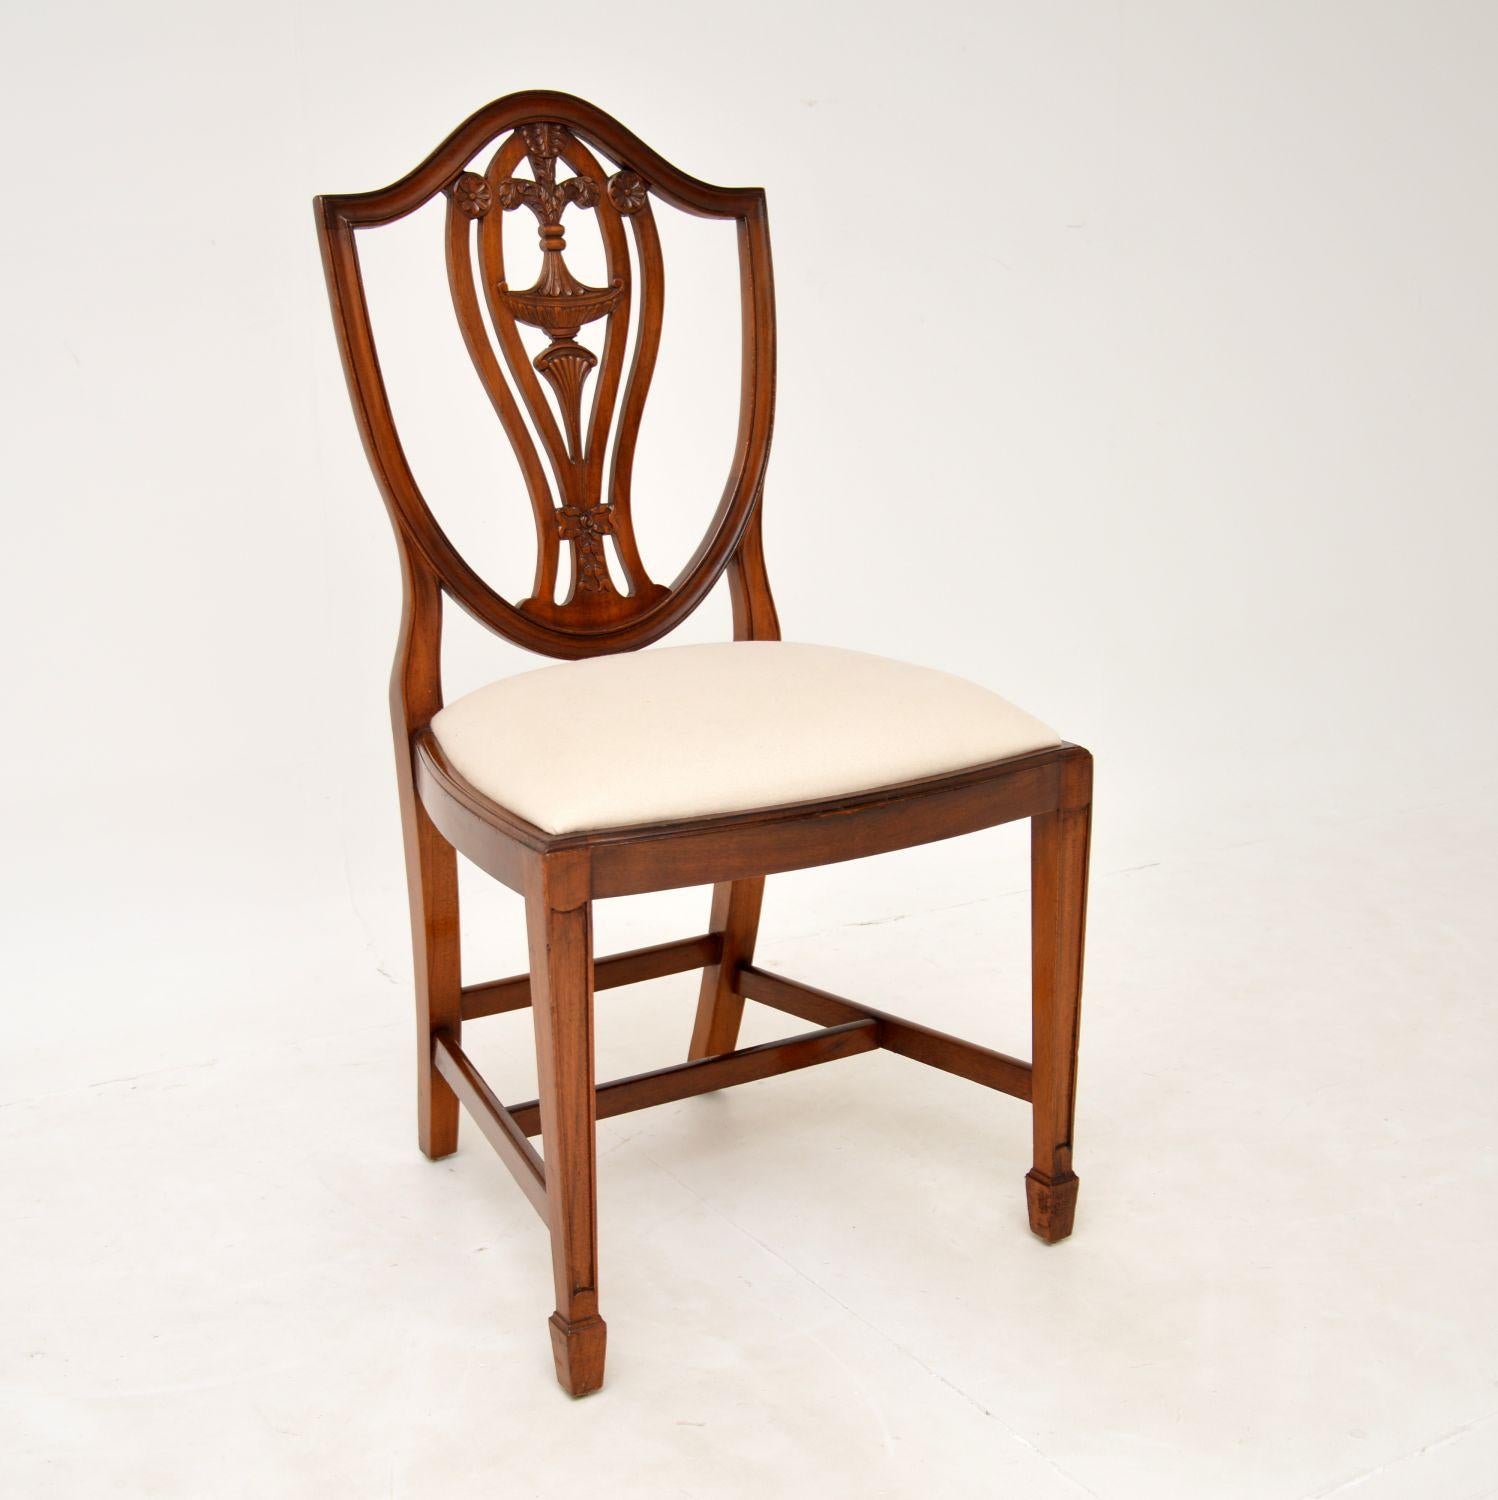 An excellent set of ten solid shield back dining chairs in the antique Georgian Adam style. These were made in England, they date from around the 1930-1950’s.

The quality is superb, these are beautifully crafted and designed. There is beautiful